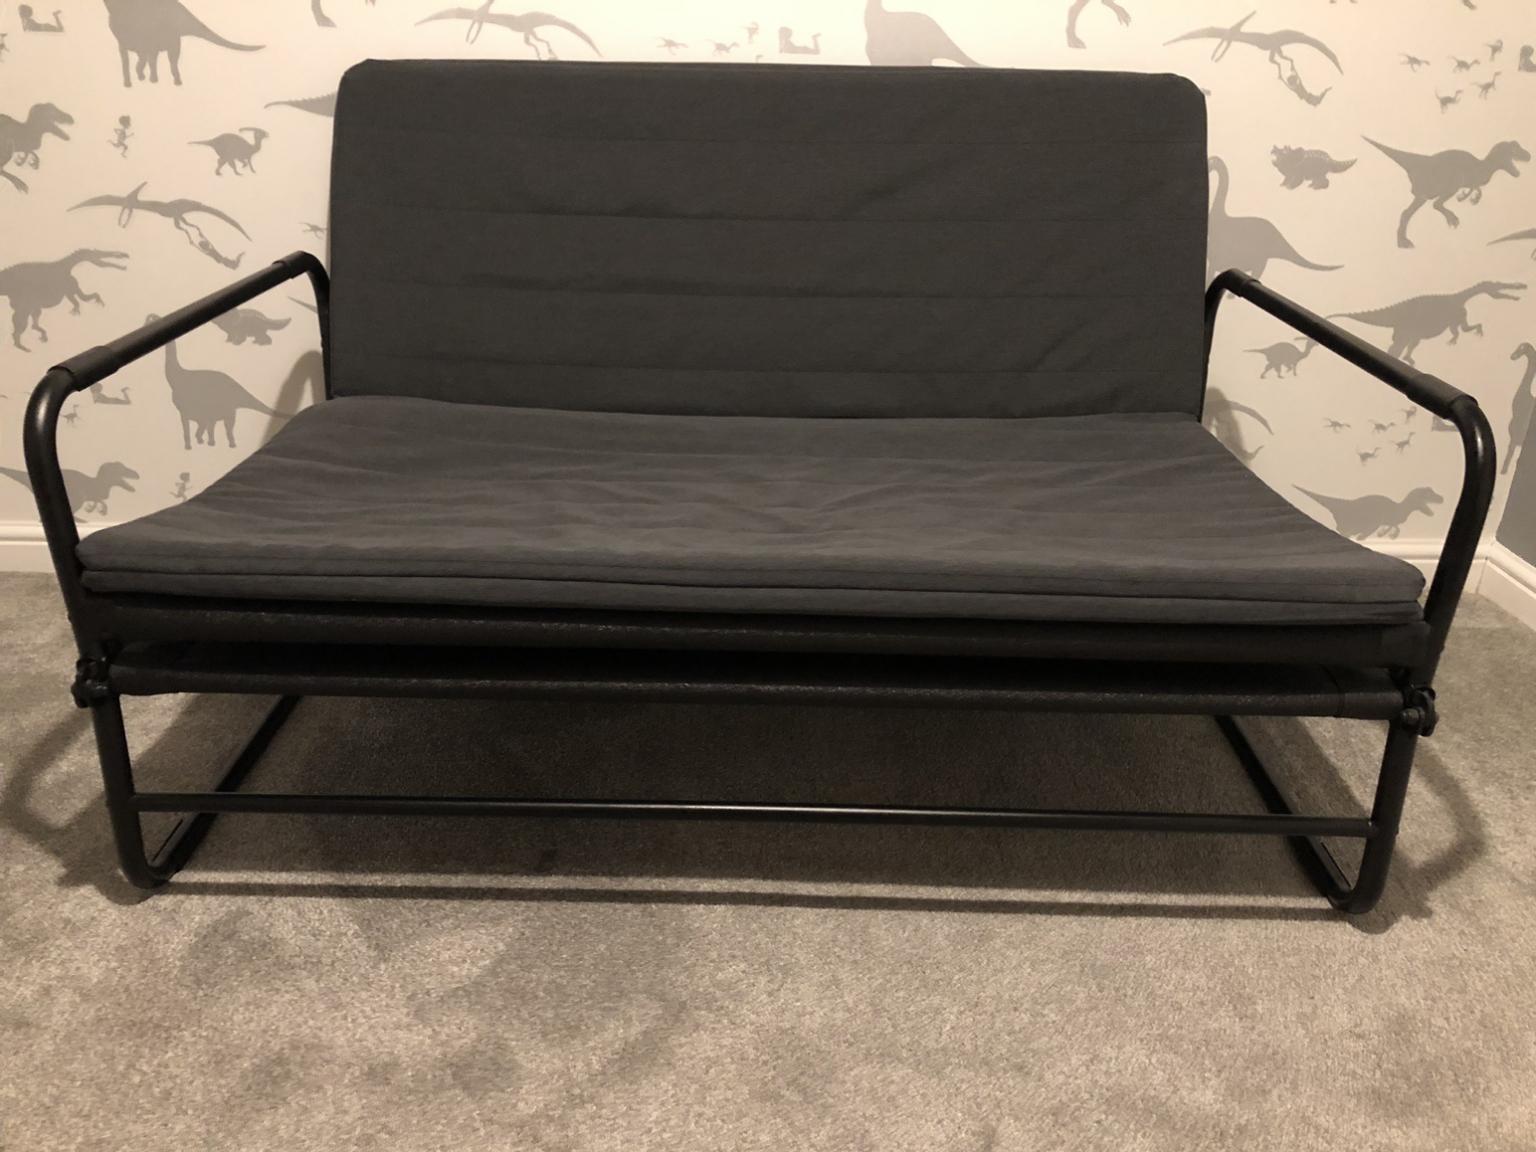 metal sofa bed with storage